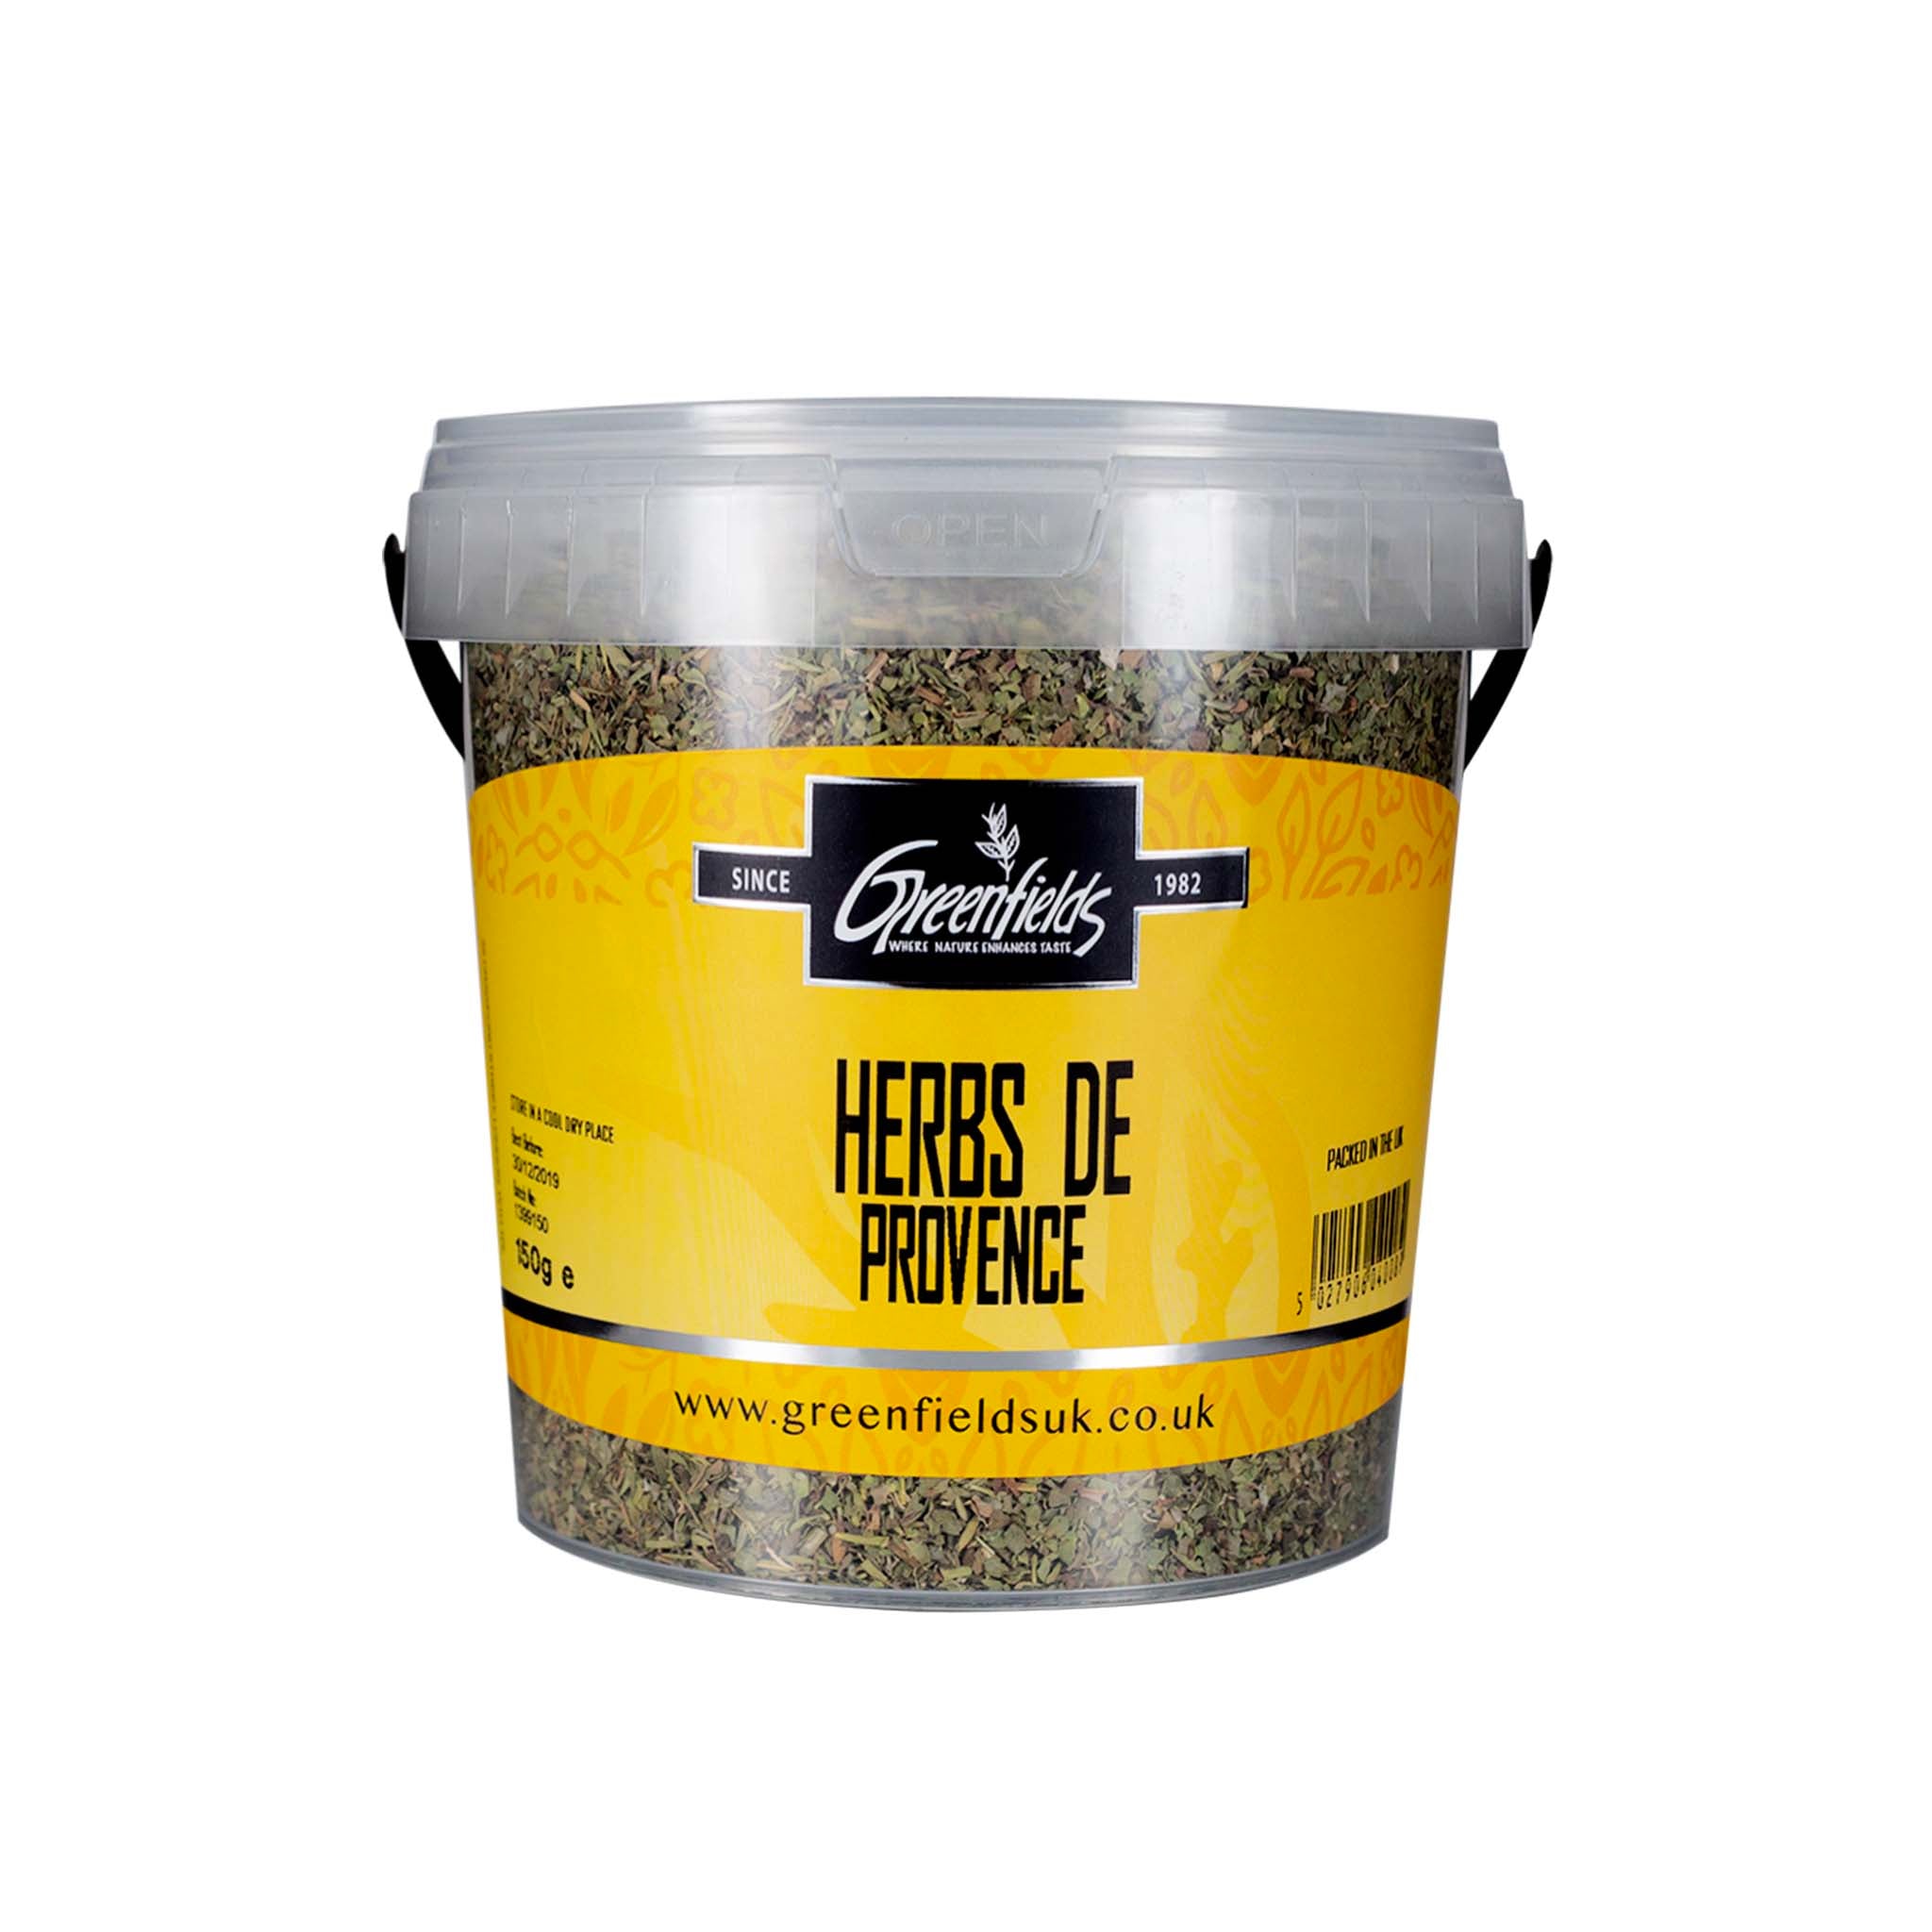 Greenfields Herbs De Provence Catering Size Ingredients Herbs & Spices Catering Size Herbs & Spices